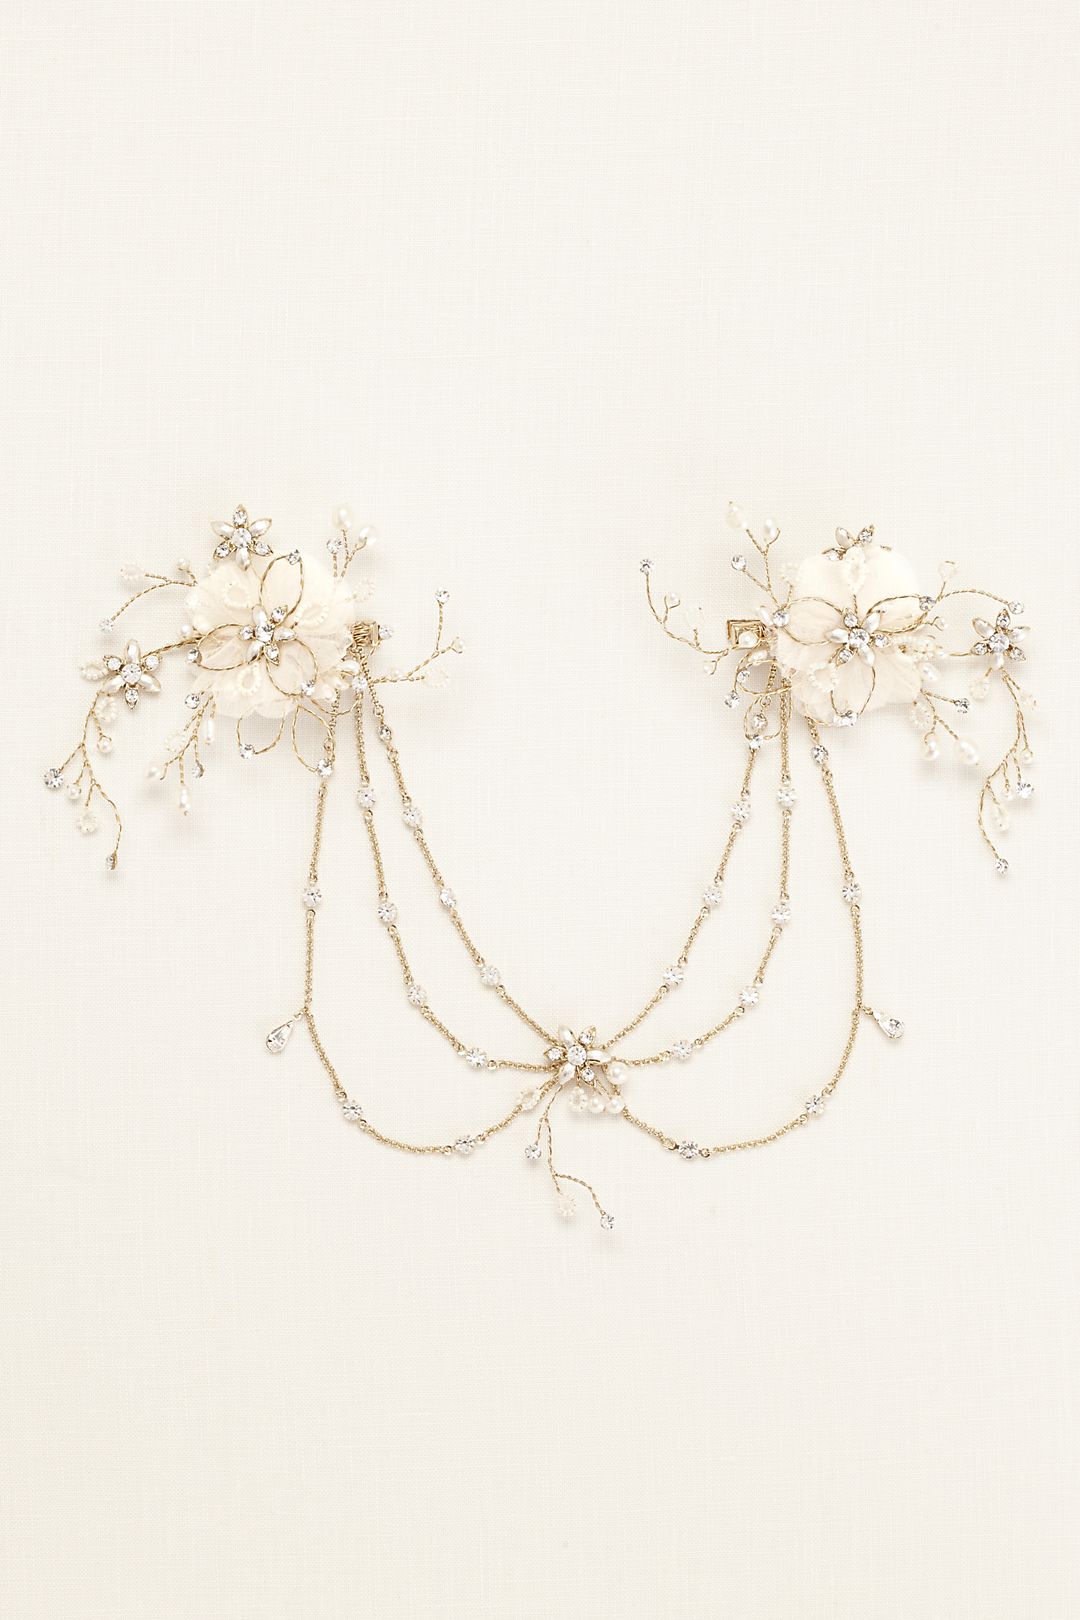 Double Flower Headpiece with Chain Swags Image 4